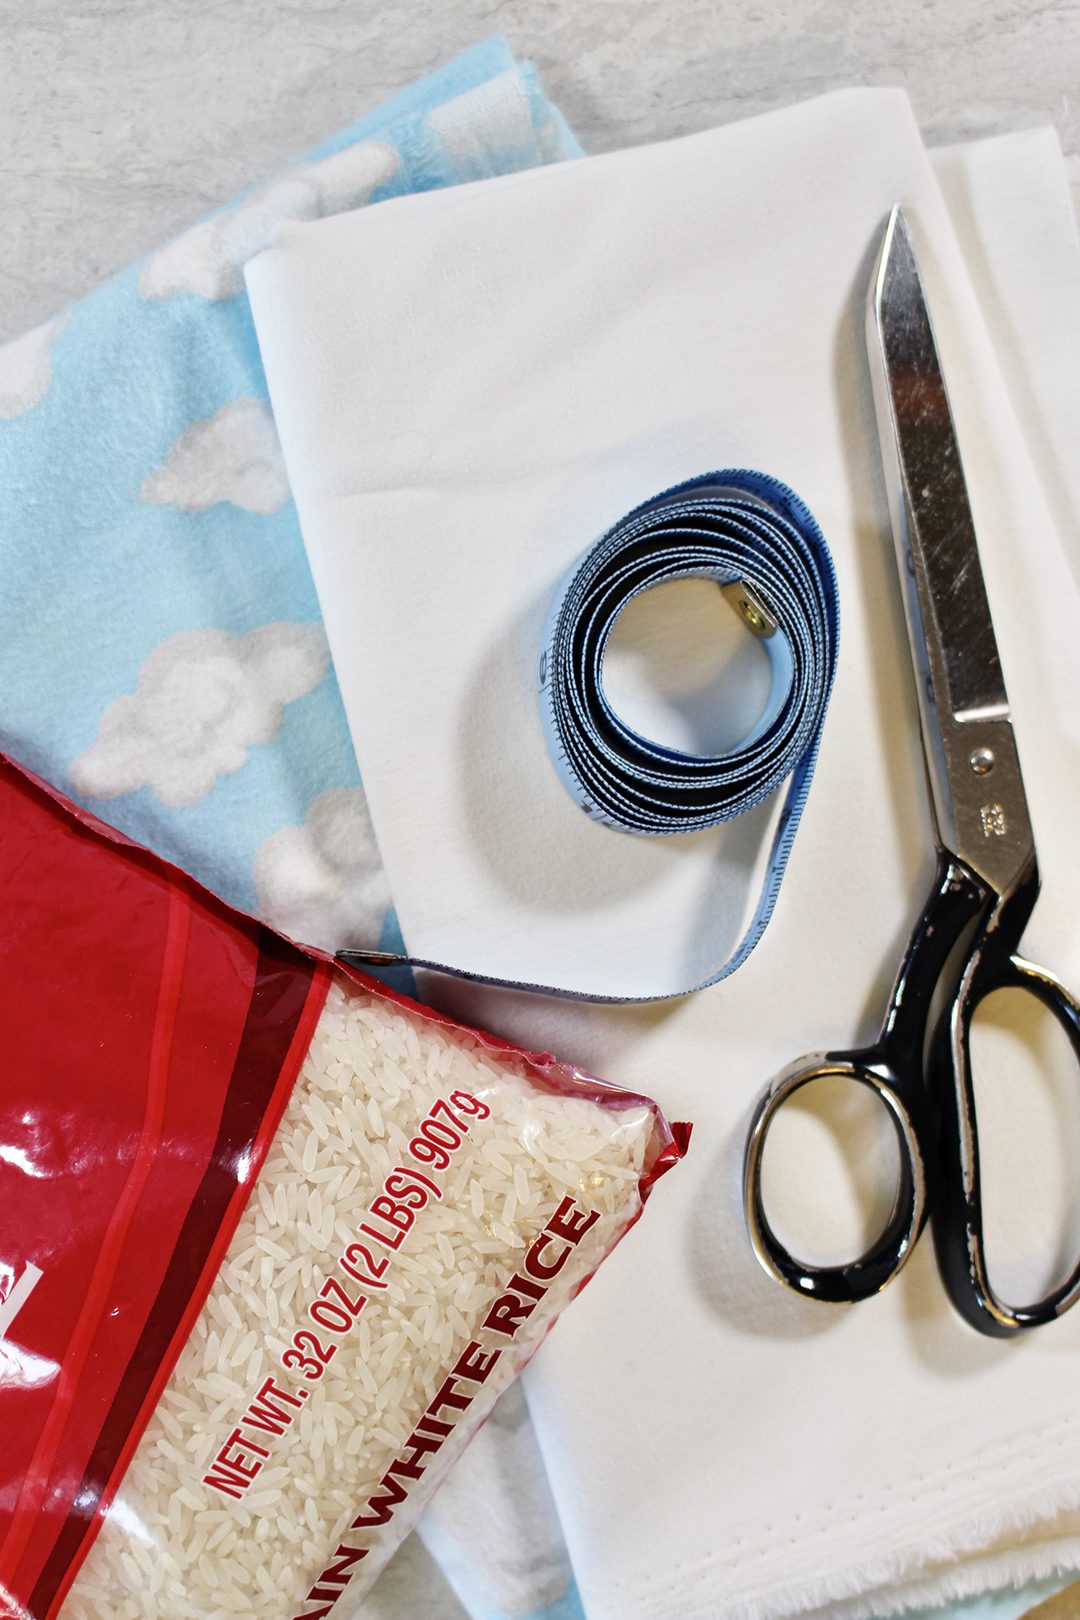 Fleece cloud pattern fabric, a bag of white rice, sewing scissors, and a measurement tape.